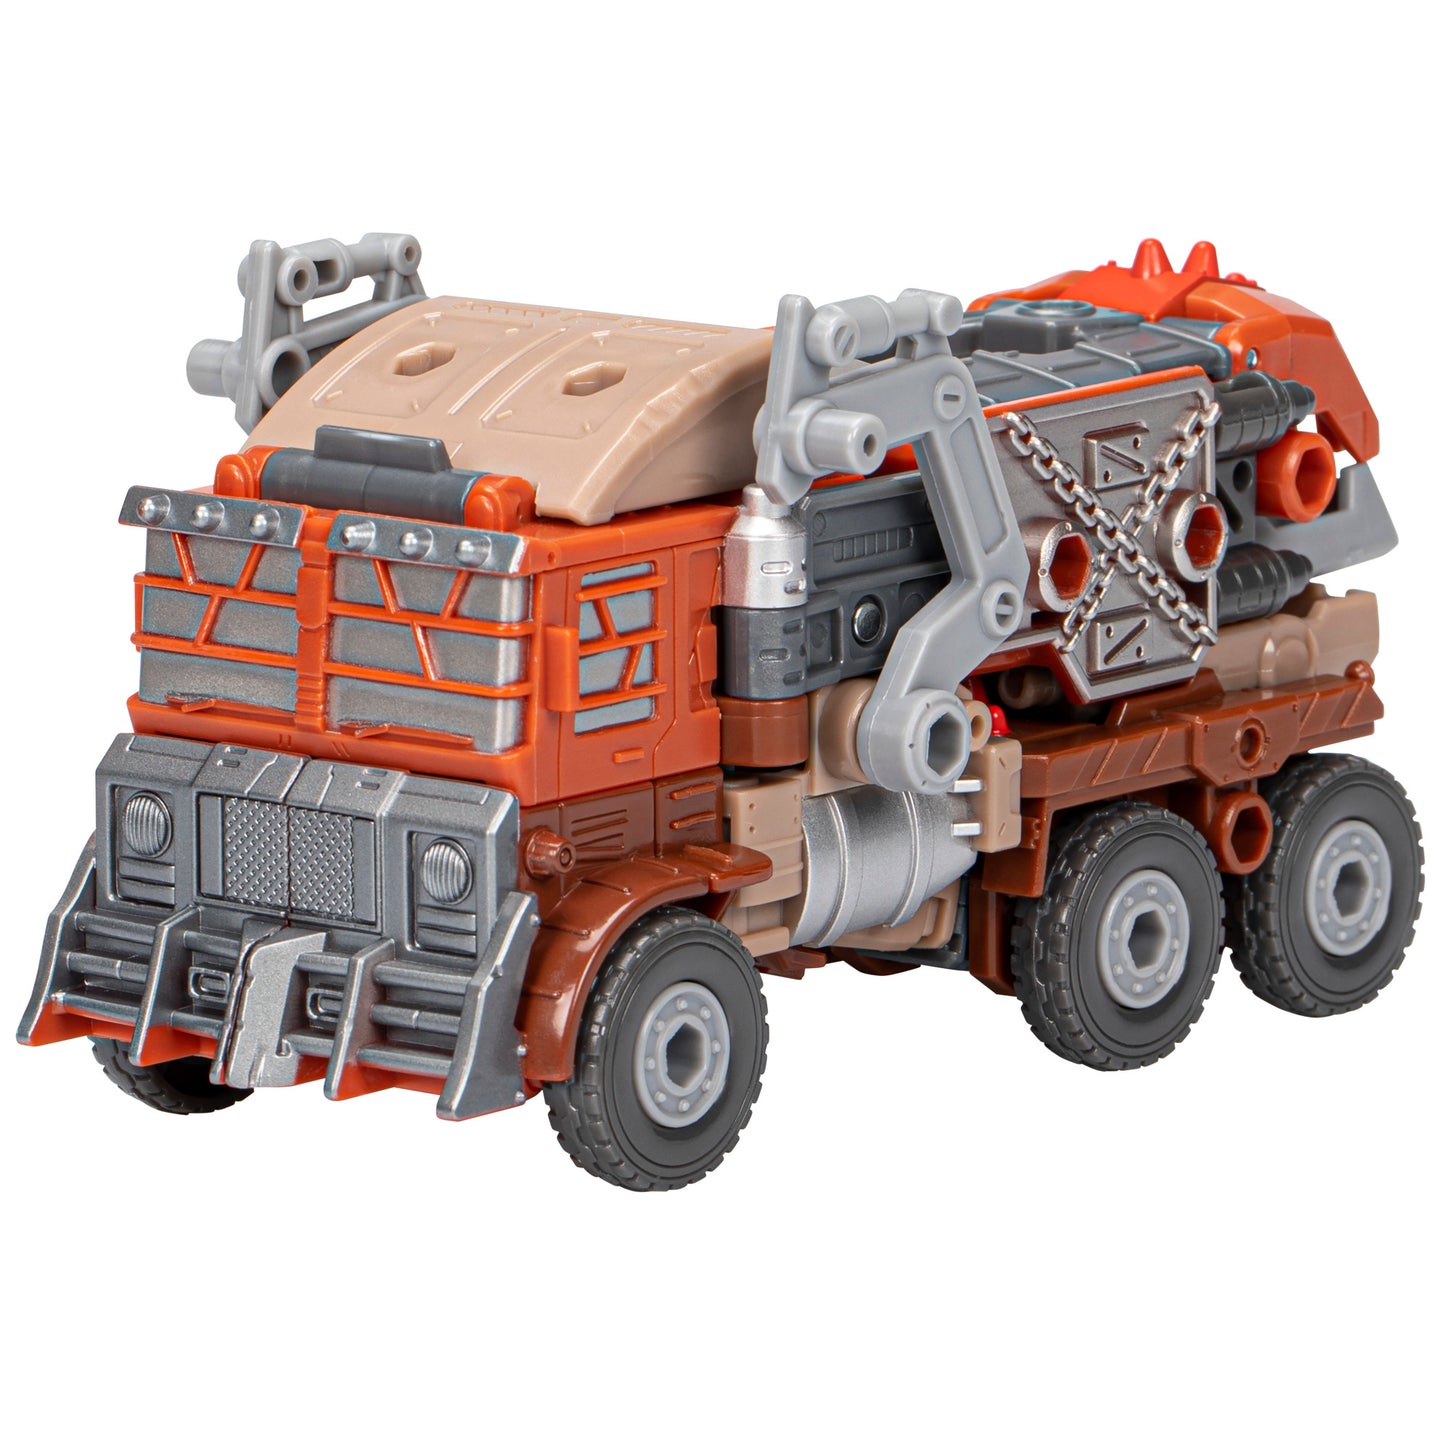 Transformers Legacy Evolution Voyager Class Trashmaster Action Figure Toy transformed in vehicle - Heretoserveyou